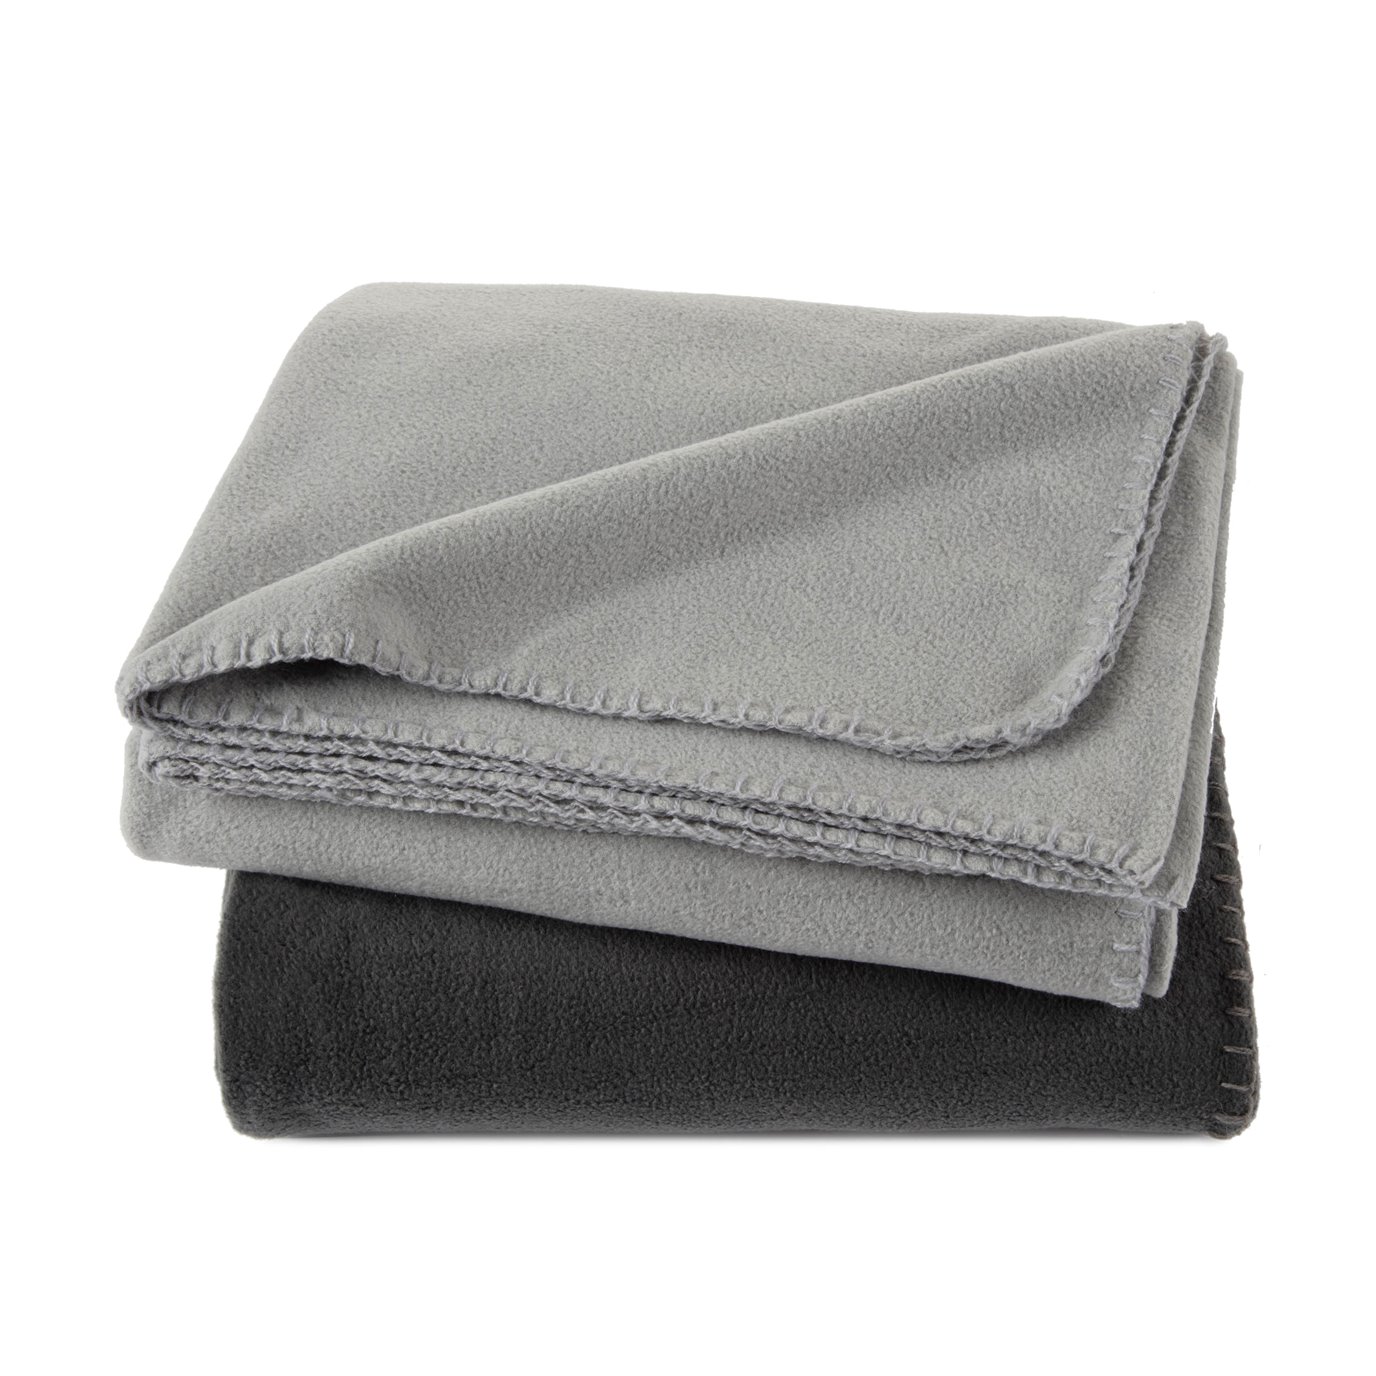 Martex 2-Pack Light Gray and Charcoal Gray Throw Set